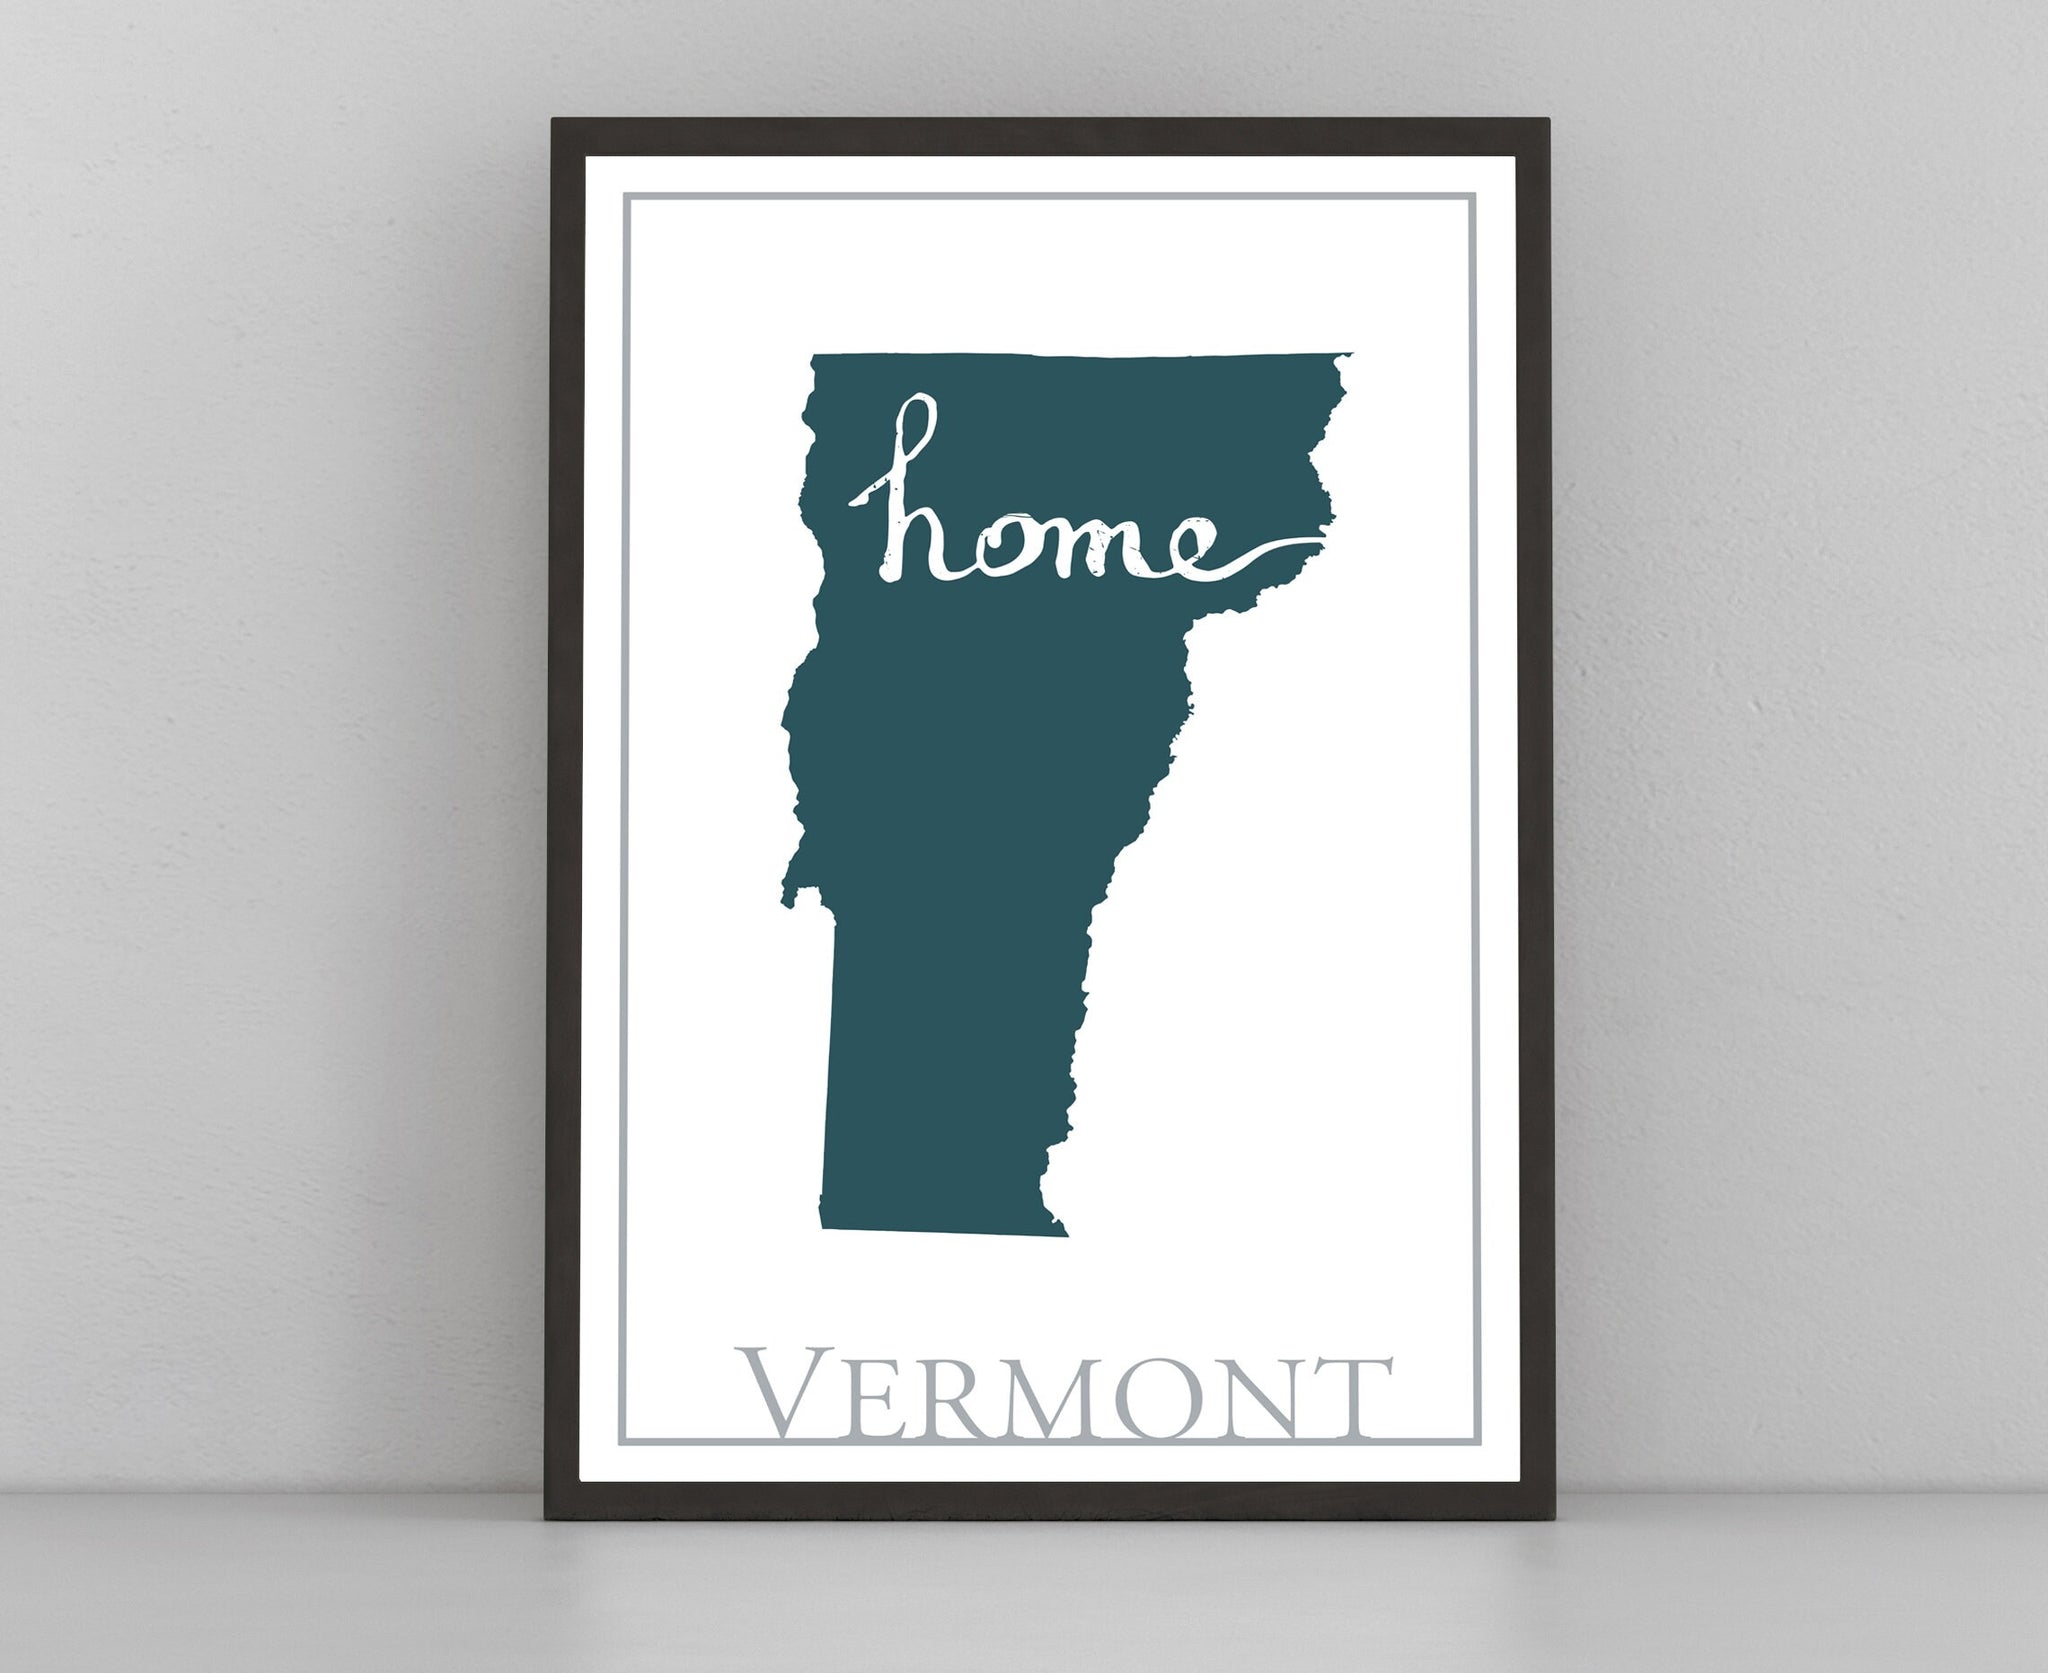 Vermont Map Wall Art, Vermont Modern Map Print, City map wall decor, Vermont City Poster Print, Vermont State Poster, Home wall decor, Gifts